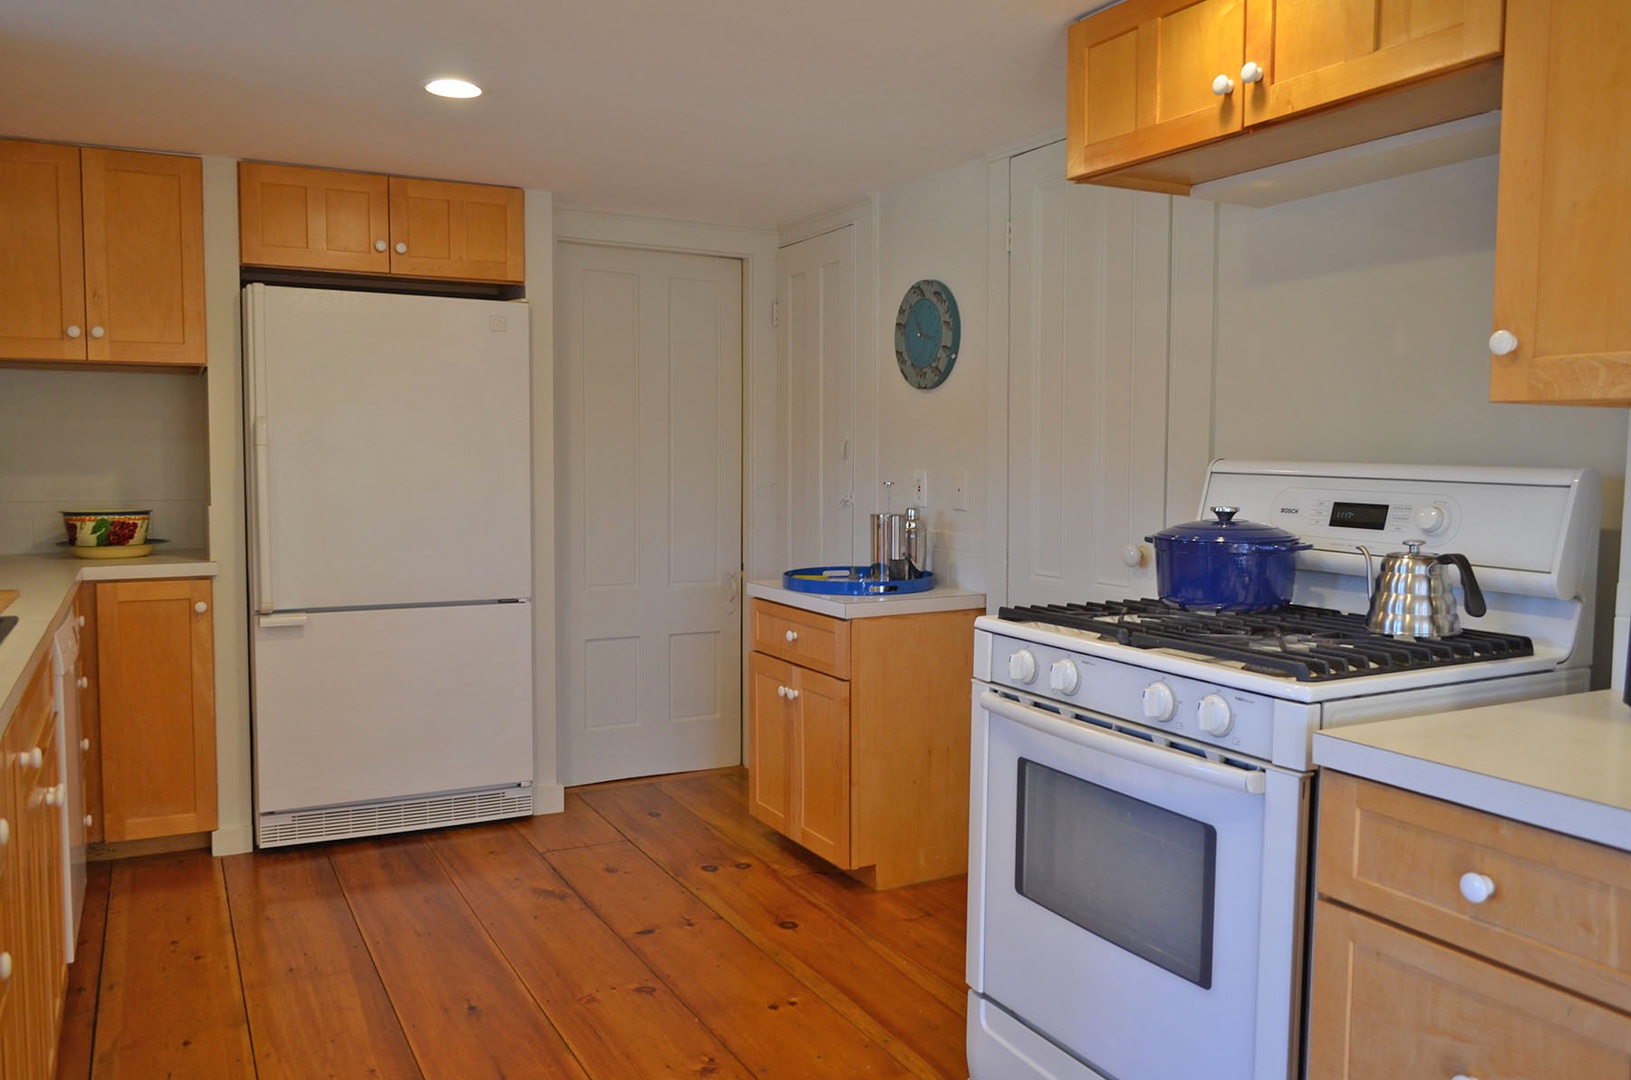 A well-applianced kitchen includes a gas stove and refrigerator.